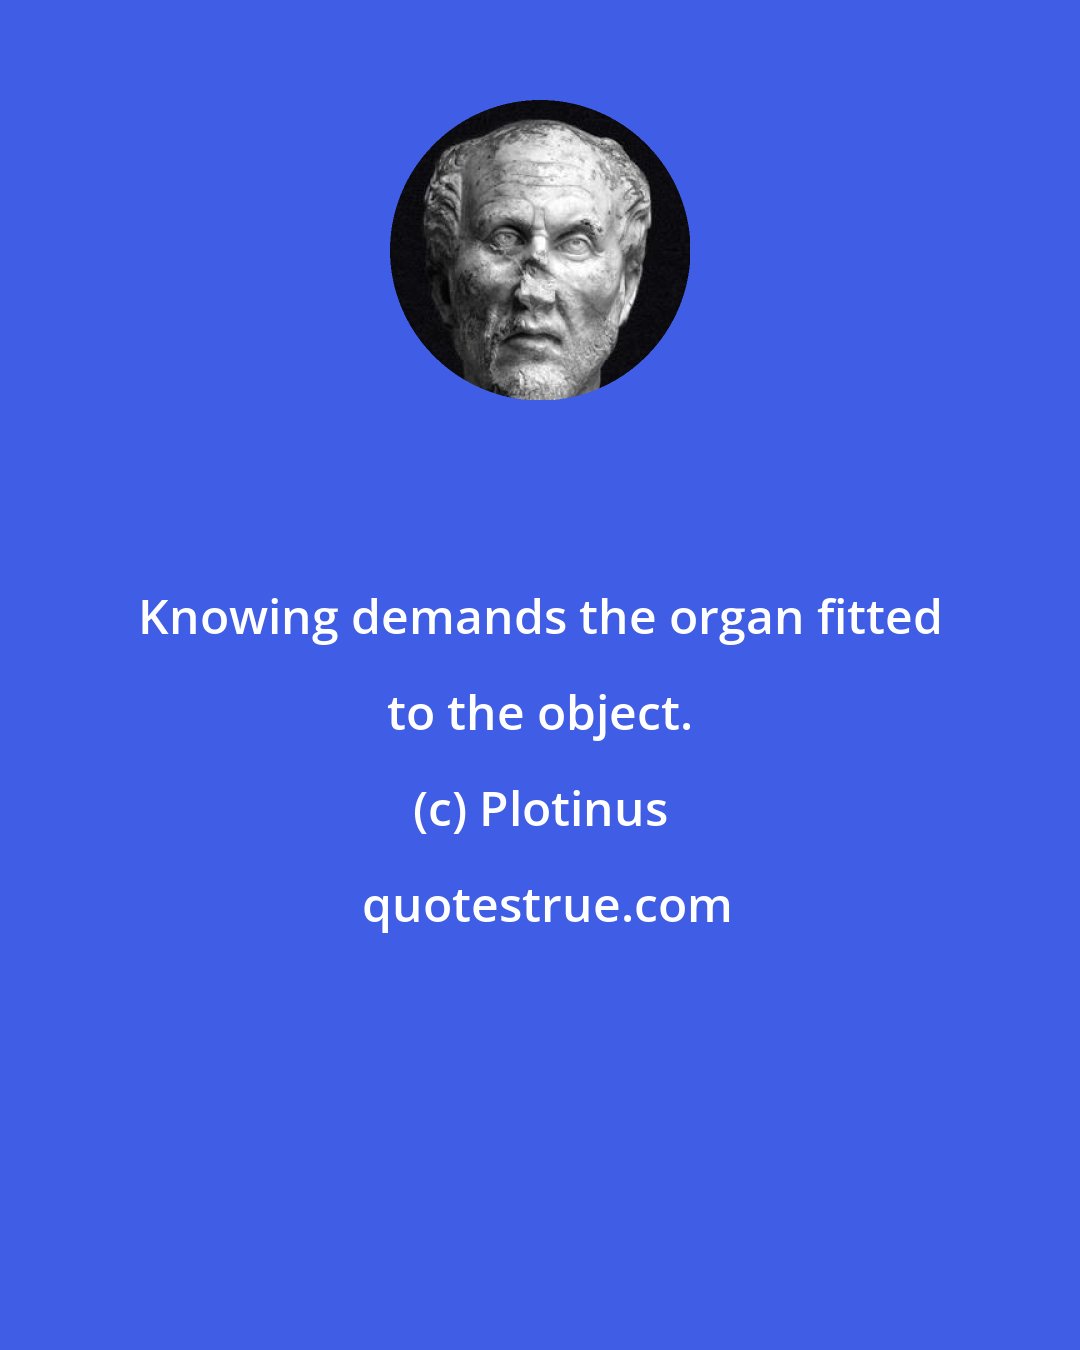 Plotinus: Knowing demands the organ fitted to the object.